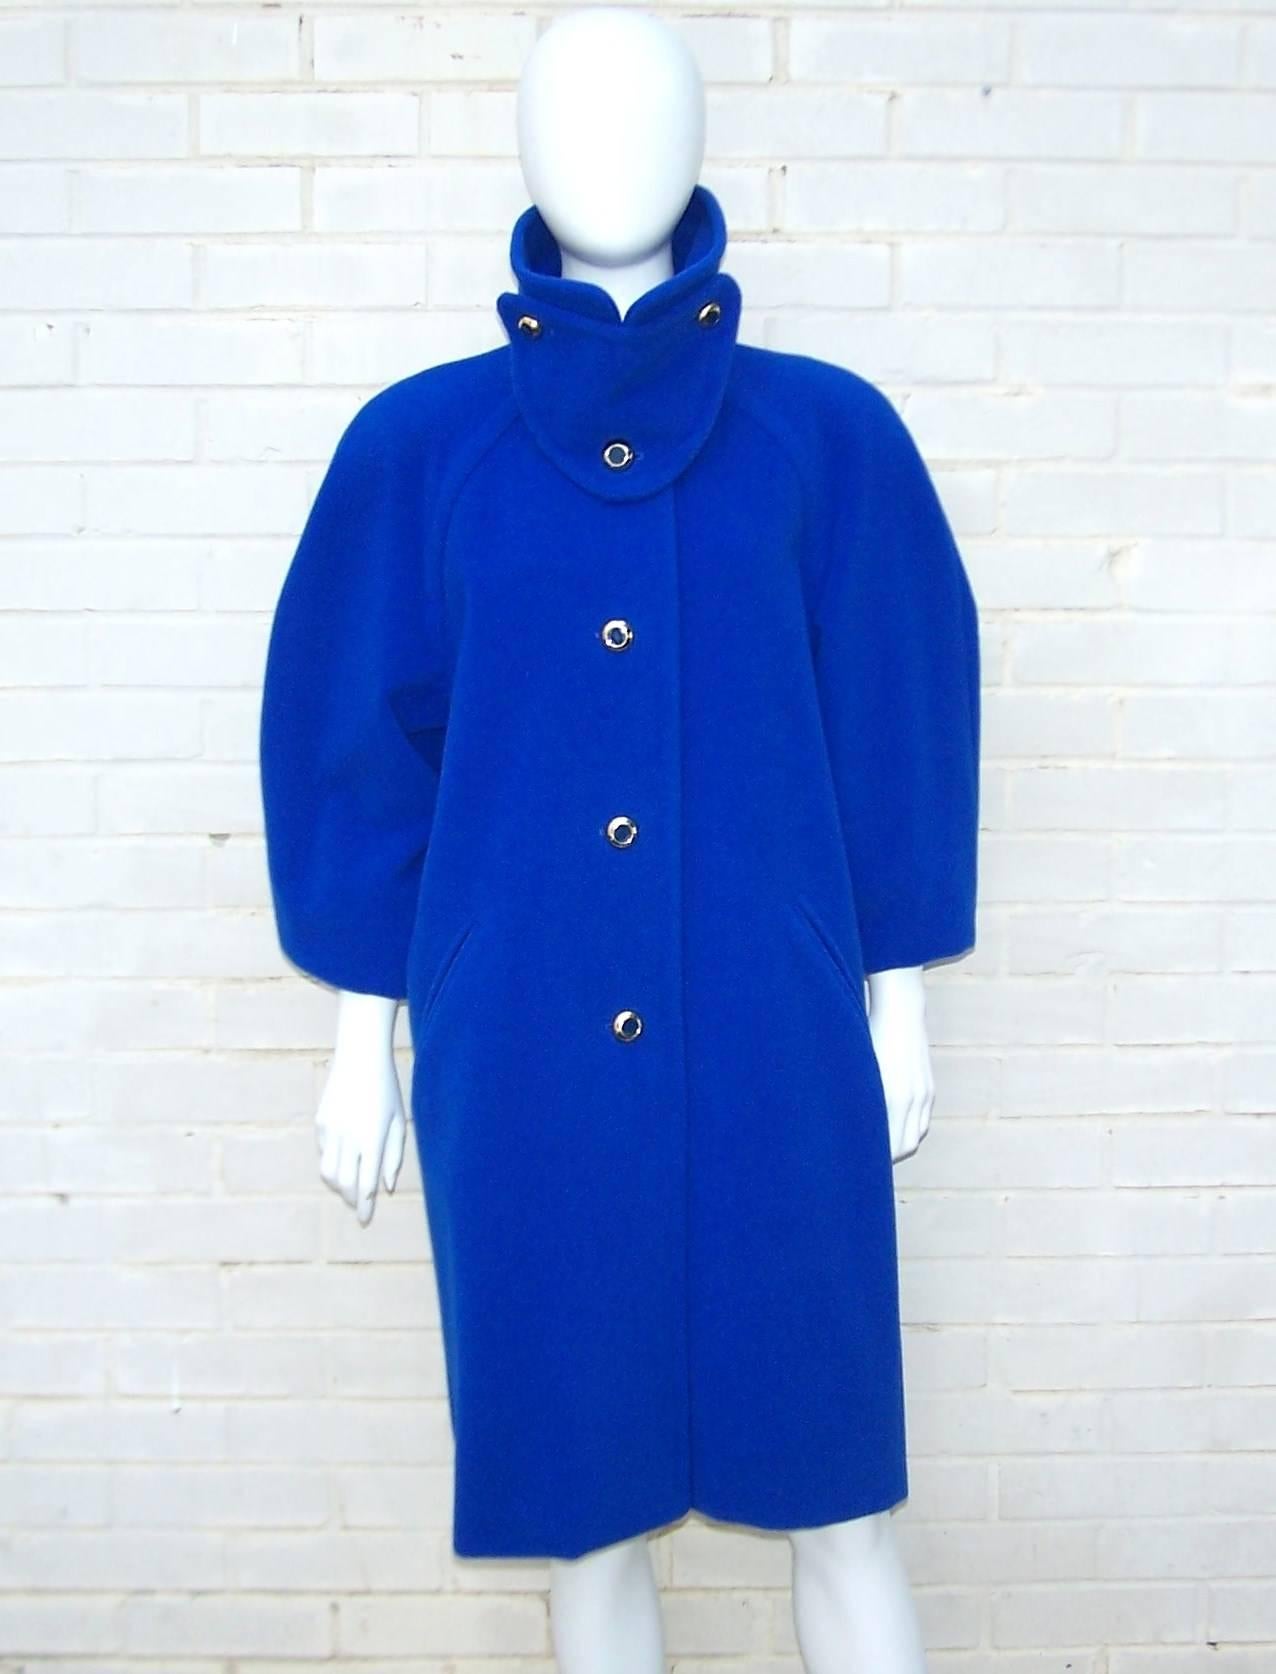 You'll be longing for a cold day so you can don this bear hug of an Escada coat!  The cozy style is enhanced by virgin wool that is soft as cashmere and the electric blue color will bring light to a gray day.  The unique triangular bib closure